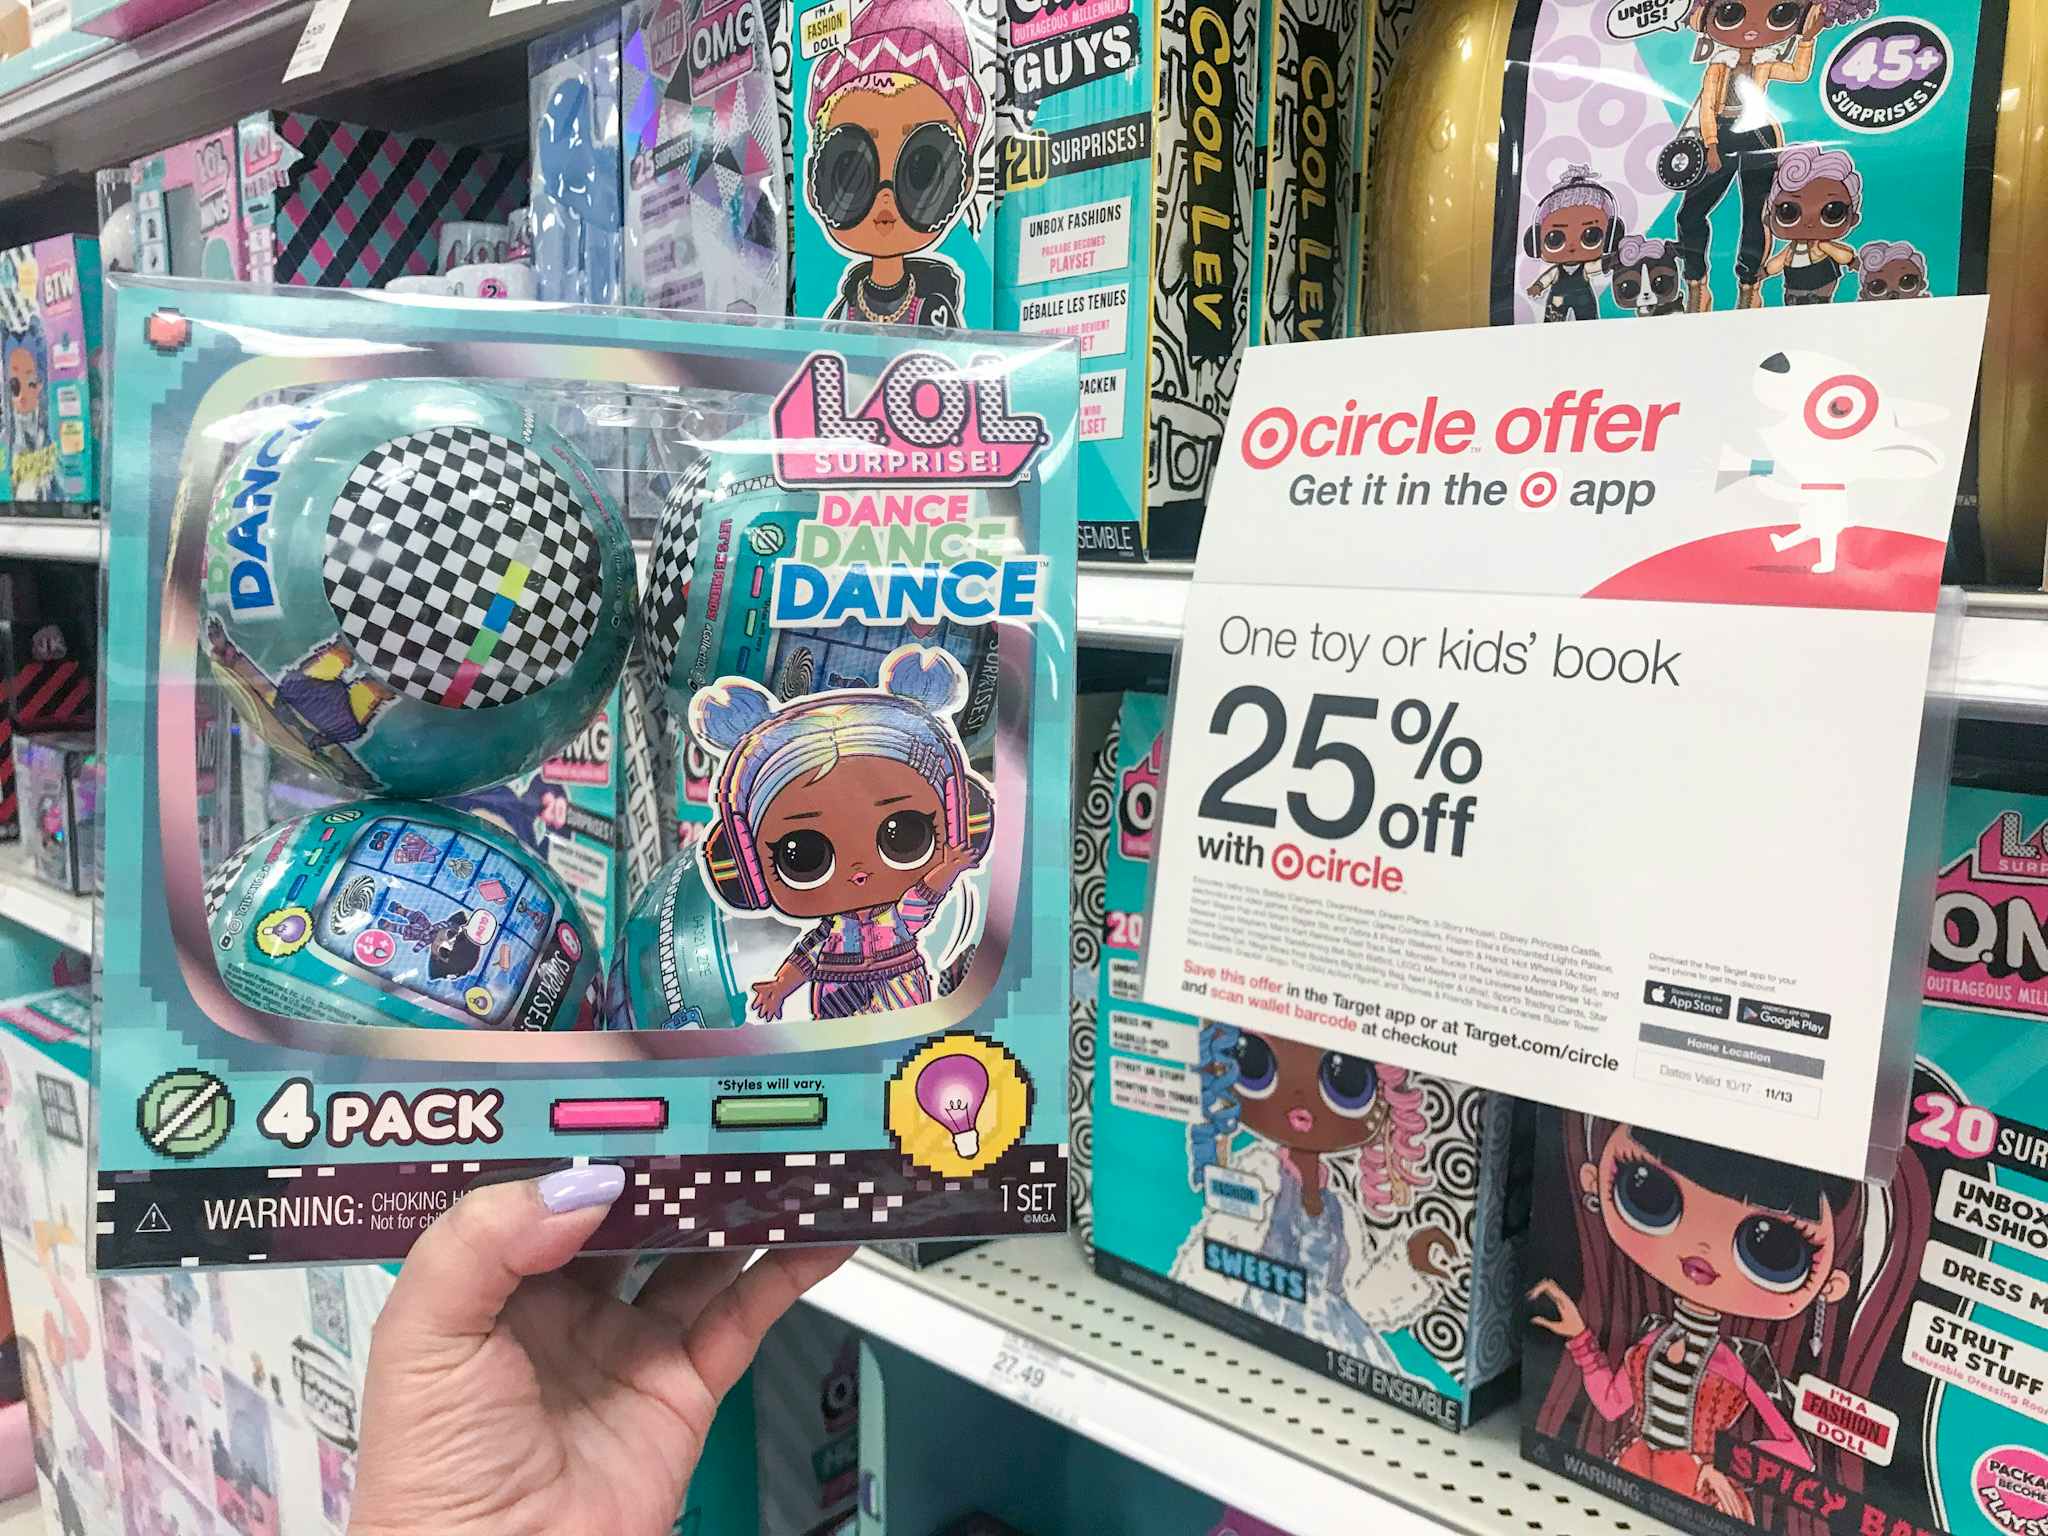 hand holding a 4-pack of lol surprise dance dance dance dolls at target